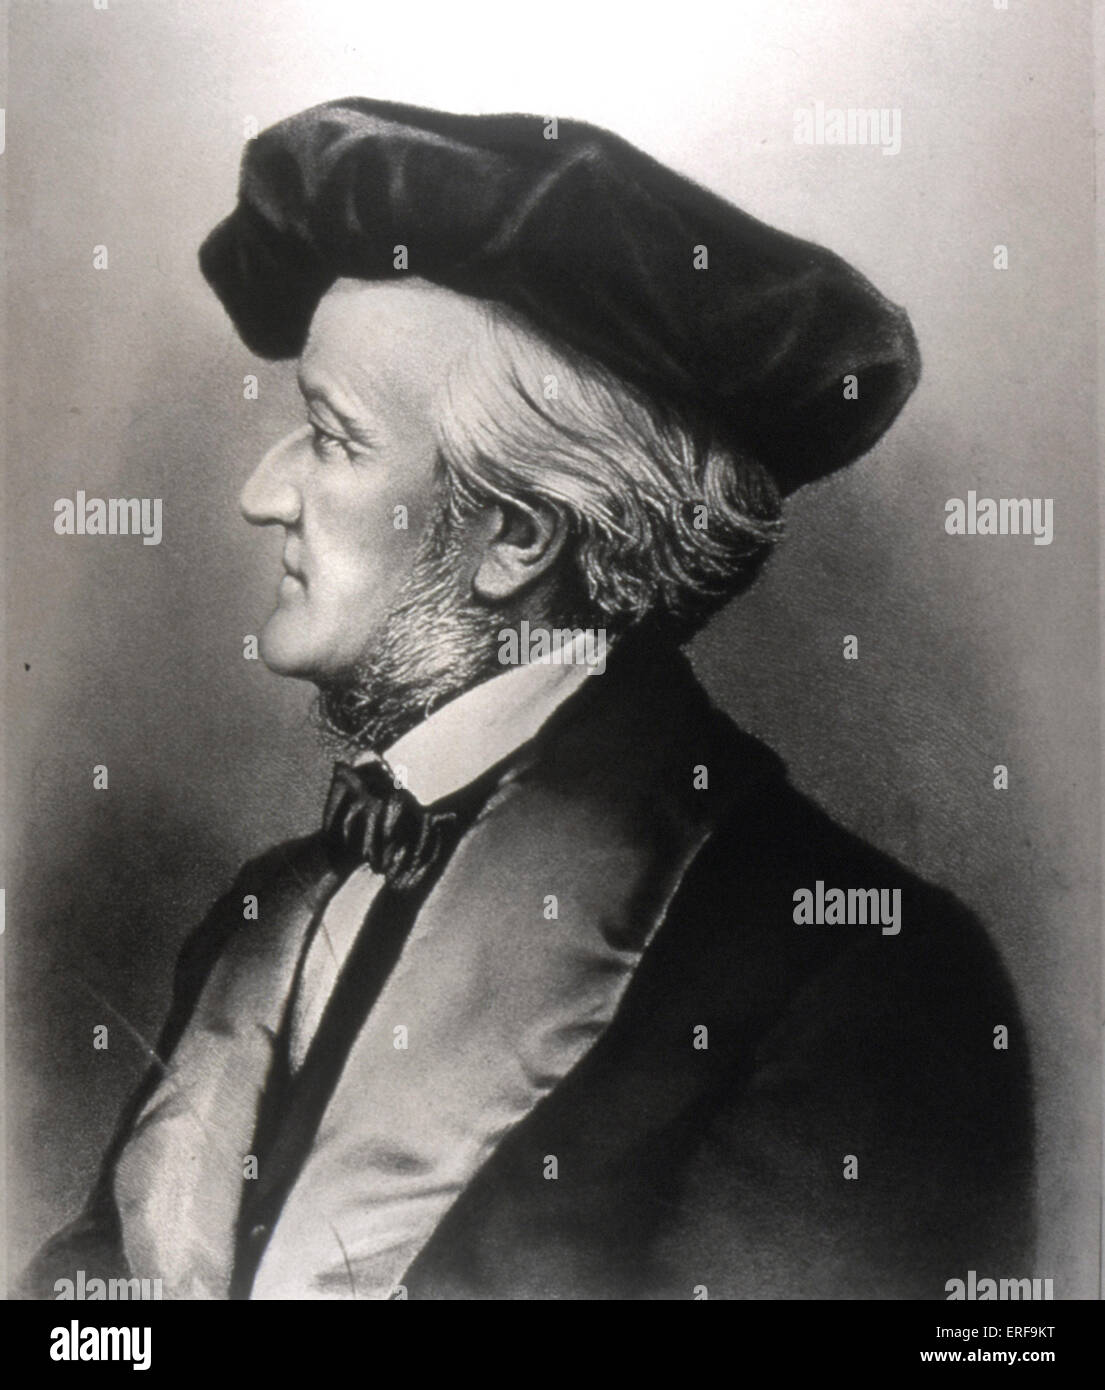 WAGNER, Richard - profile with hat. German composer & author, 22 May 1813 - 13 February 1883. Stock Photo